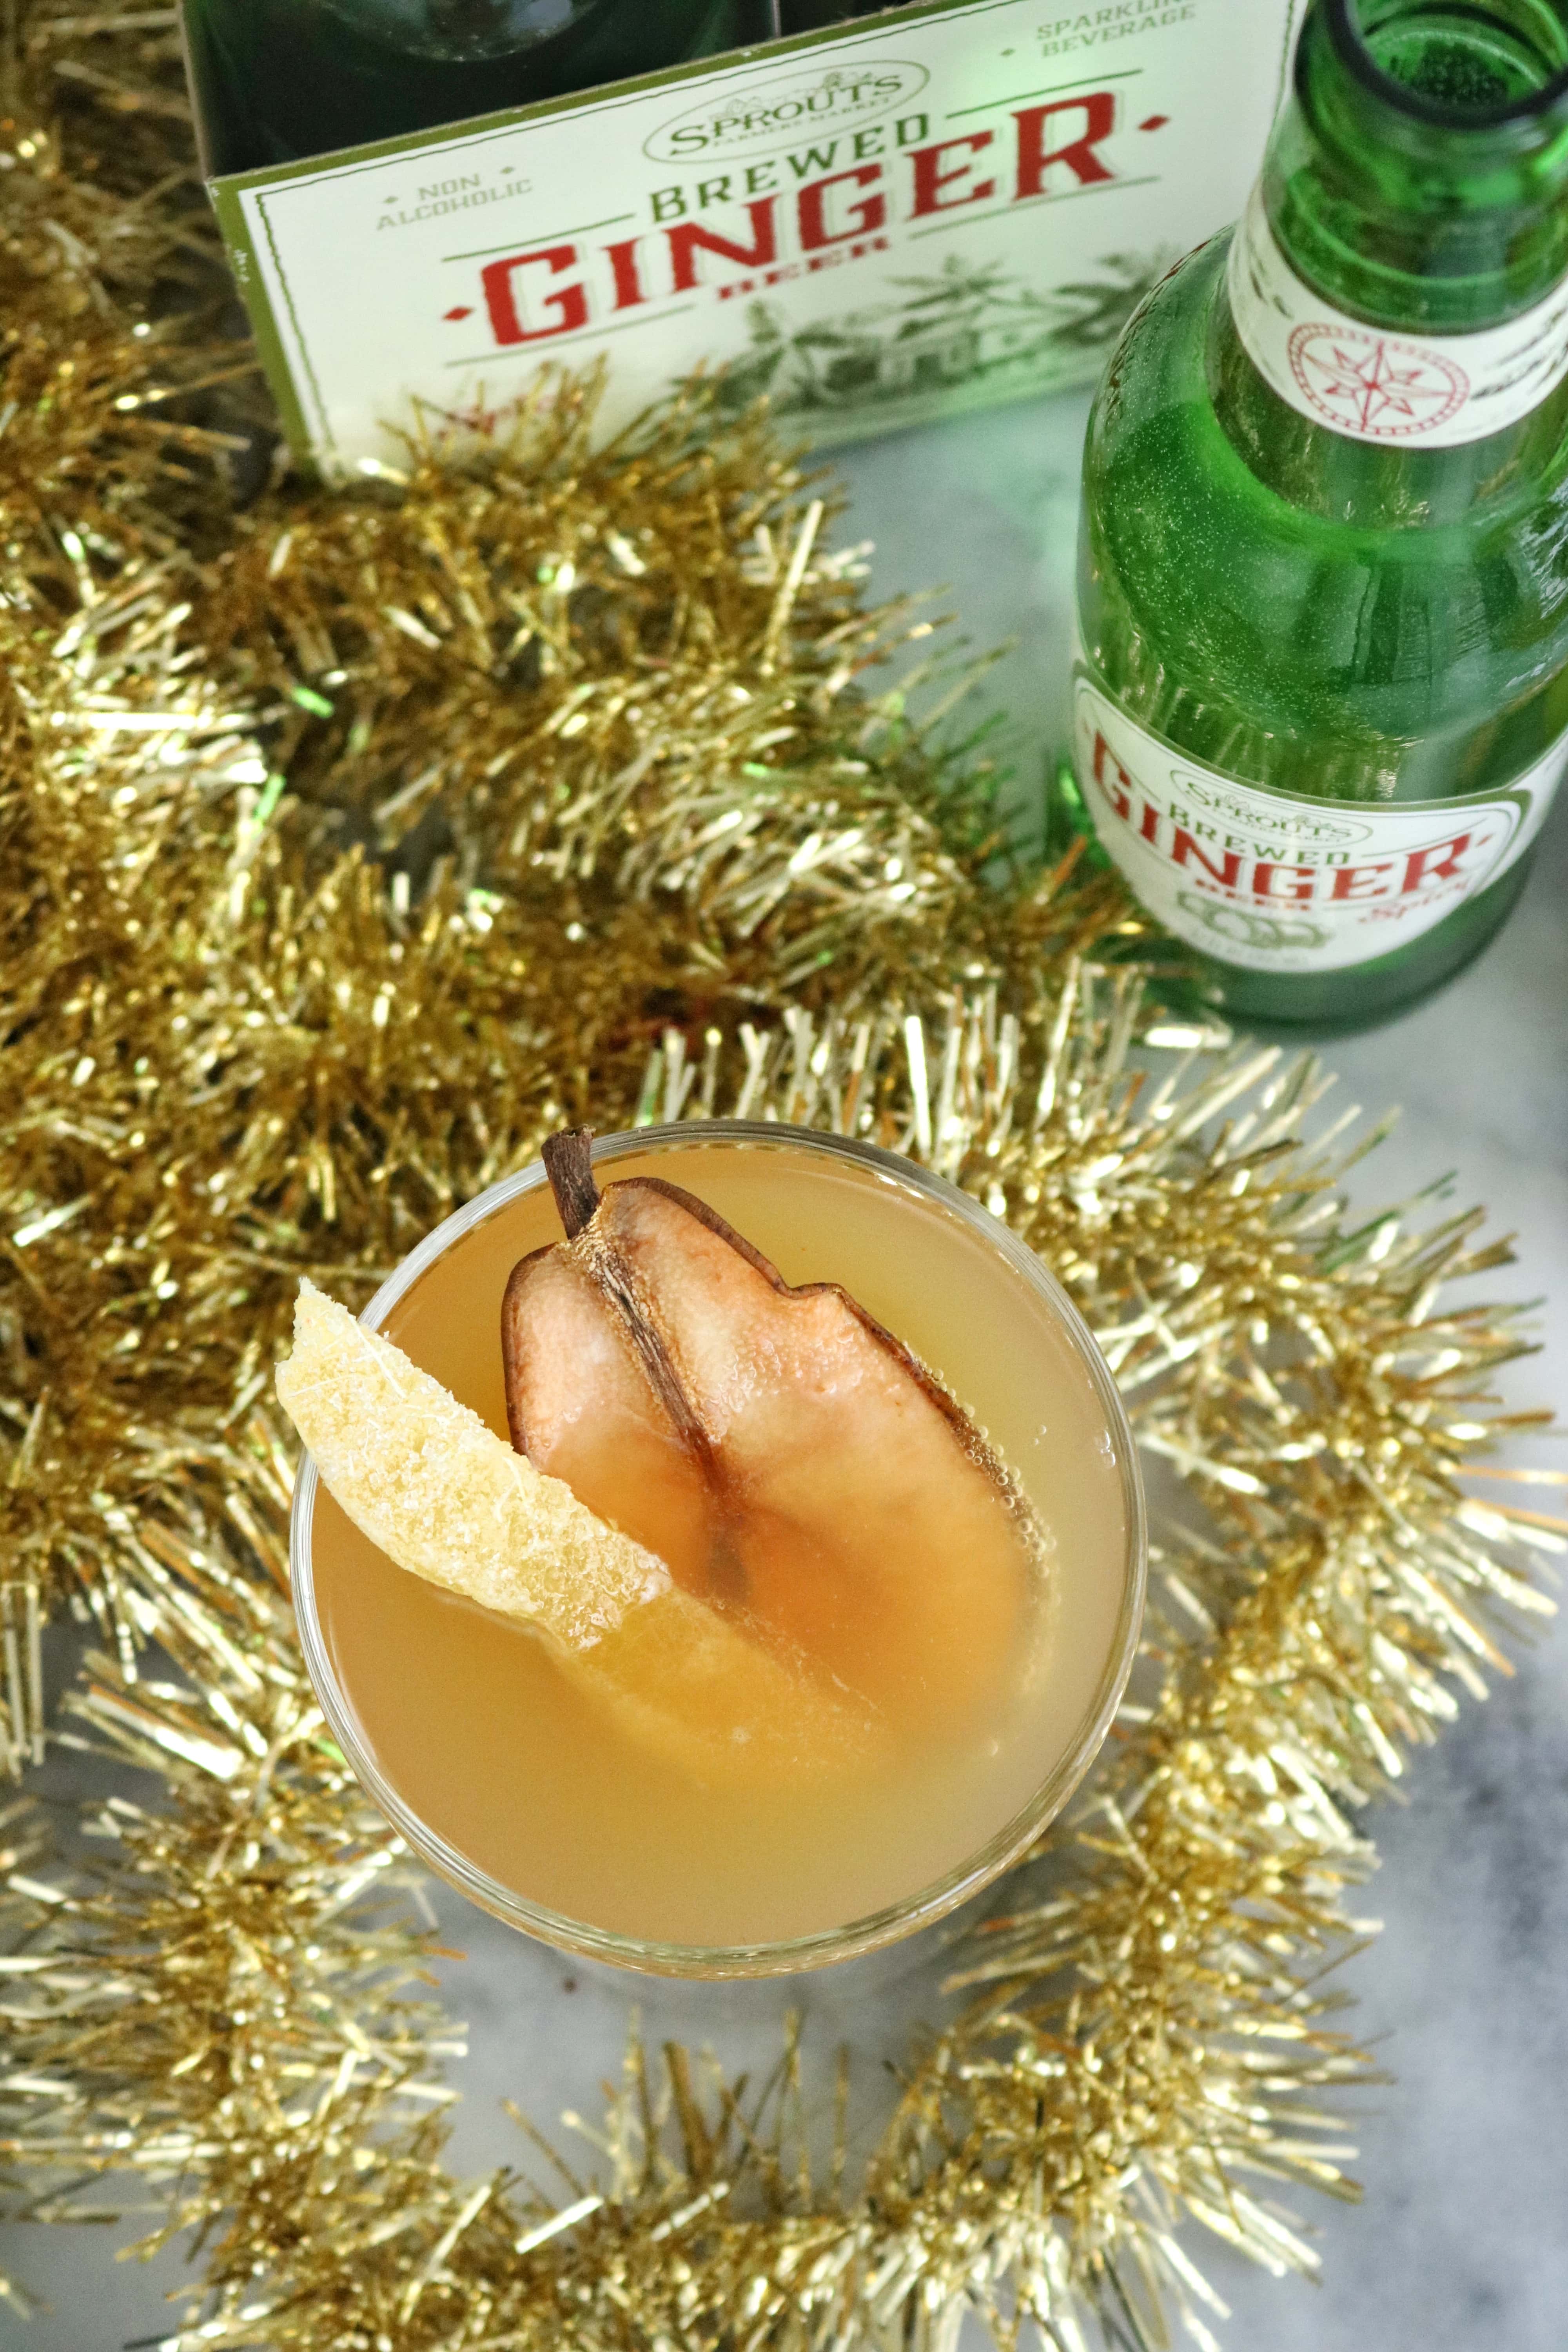 Ginger Beer Pear Punch | The Nutrition Adventure